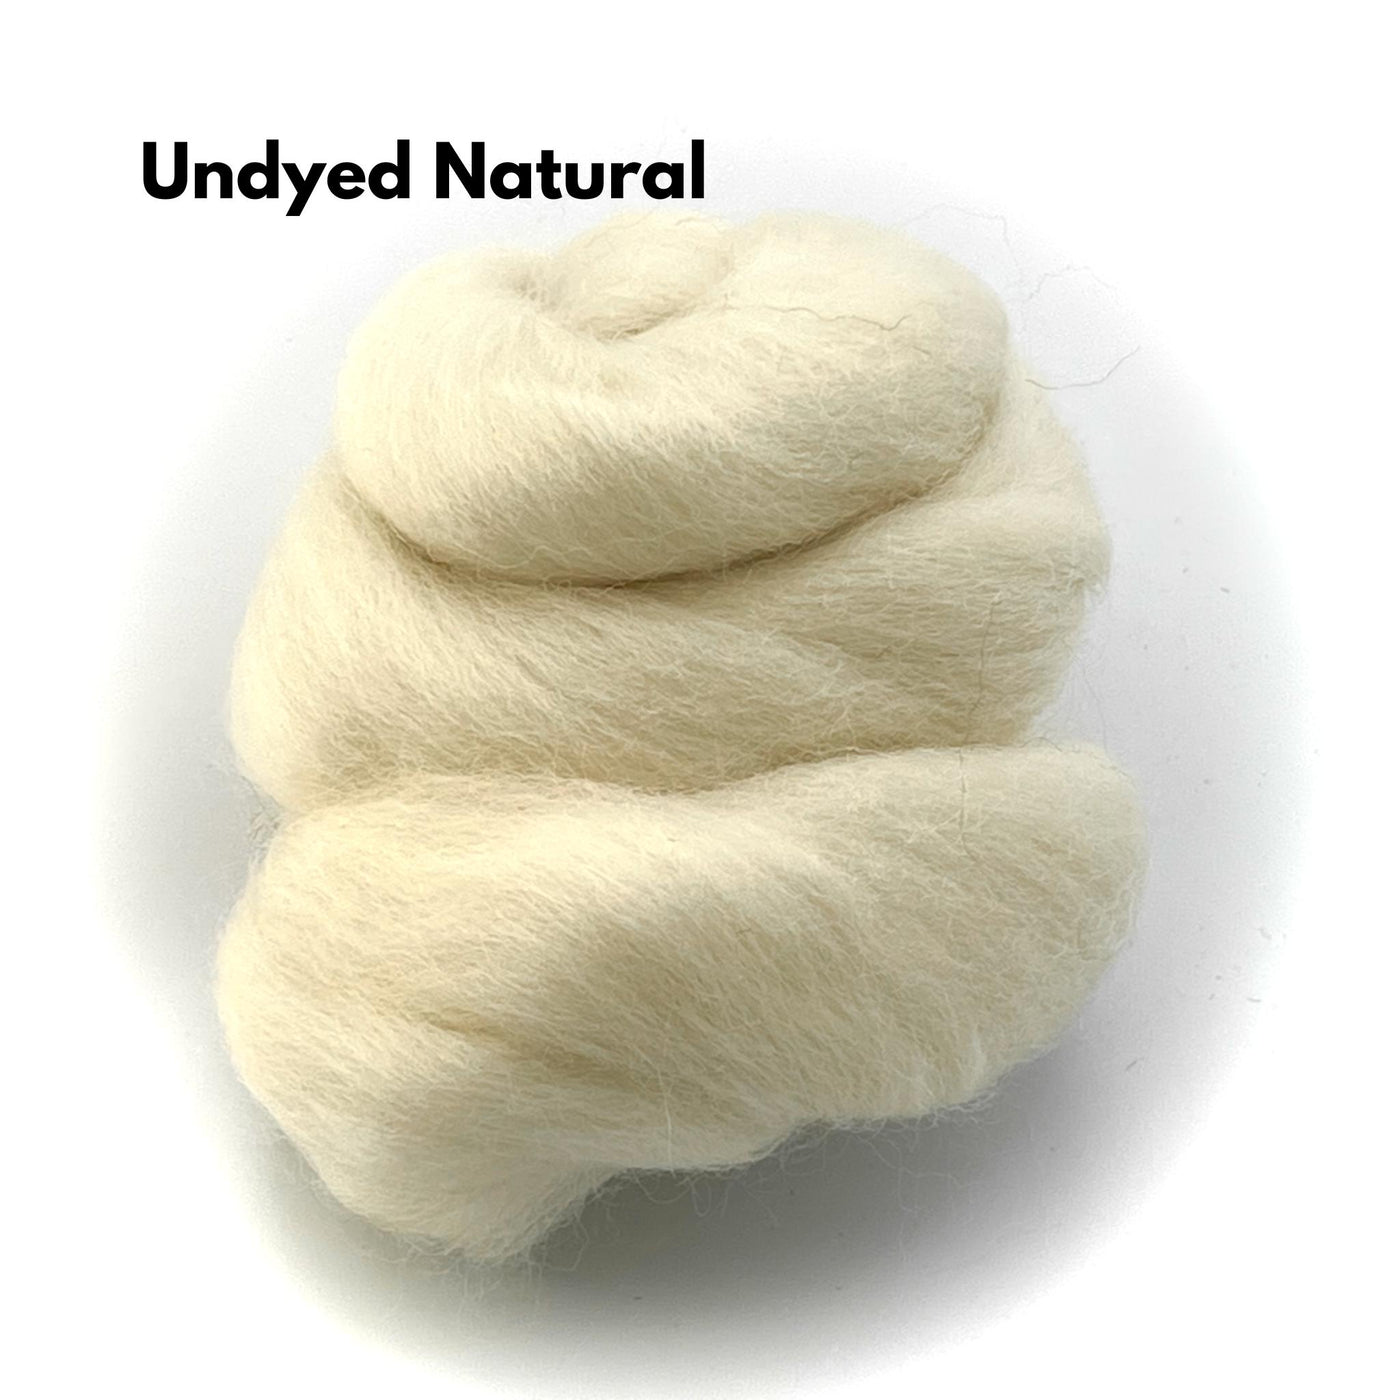 Natural Undyed White Corriedale Wool